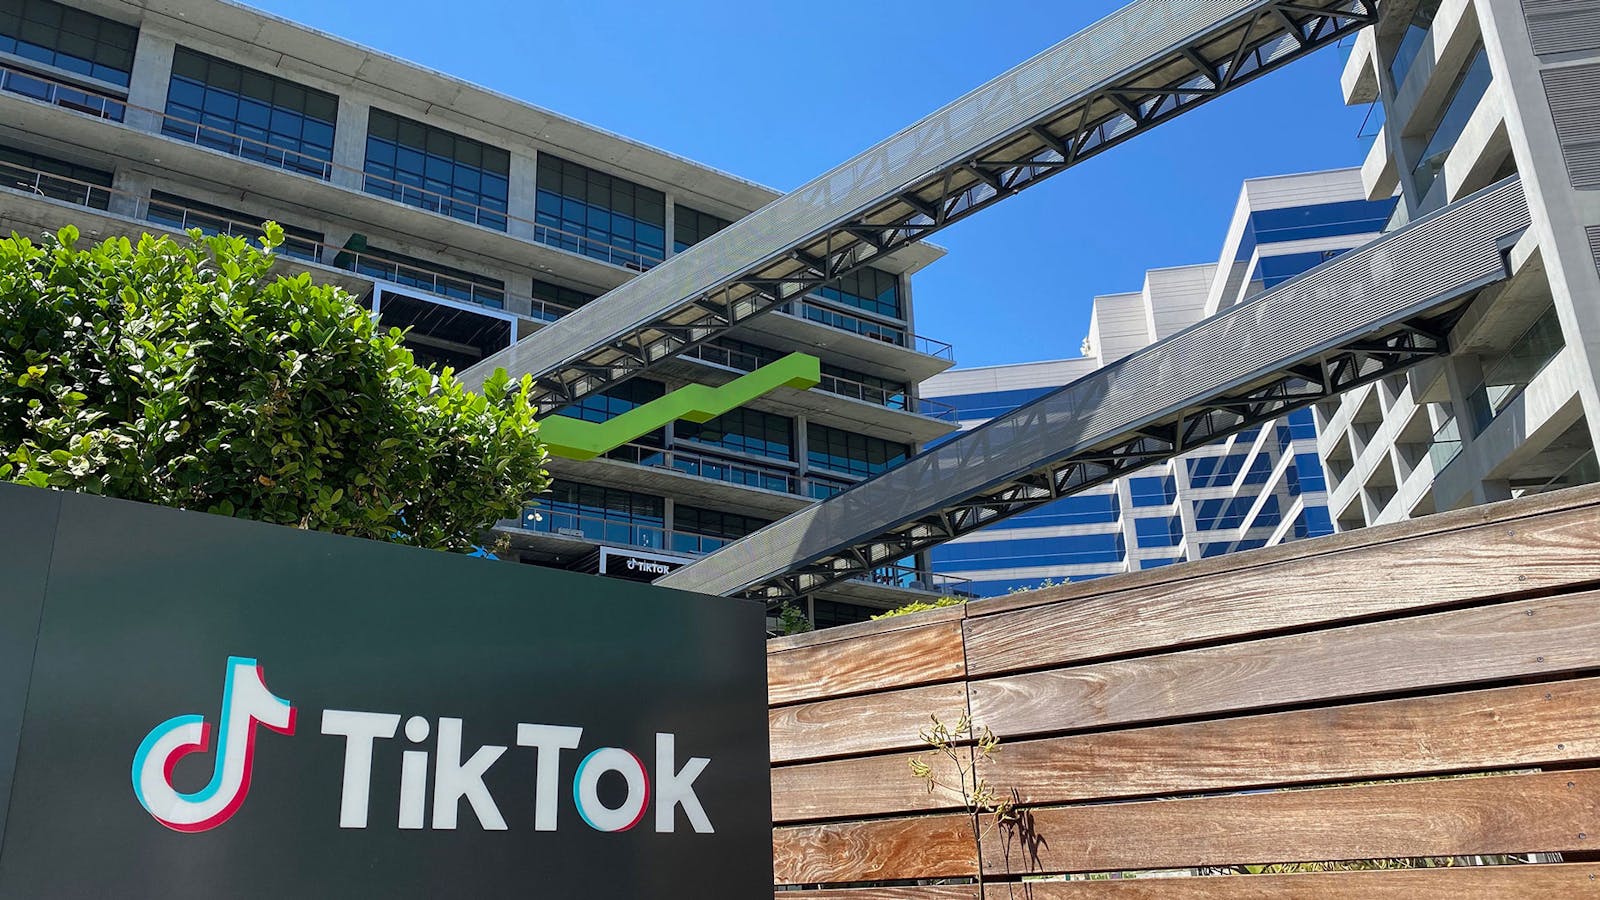 TikTok's Los Angeles office. Photo by Getty Images